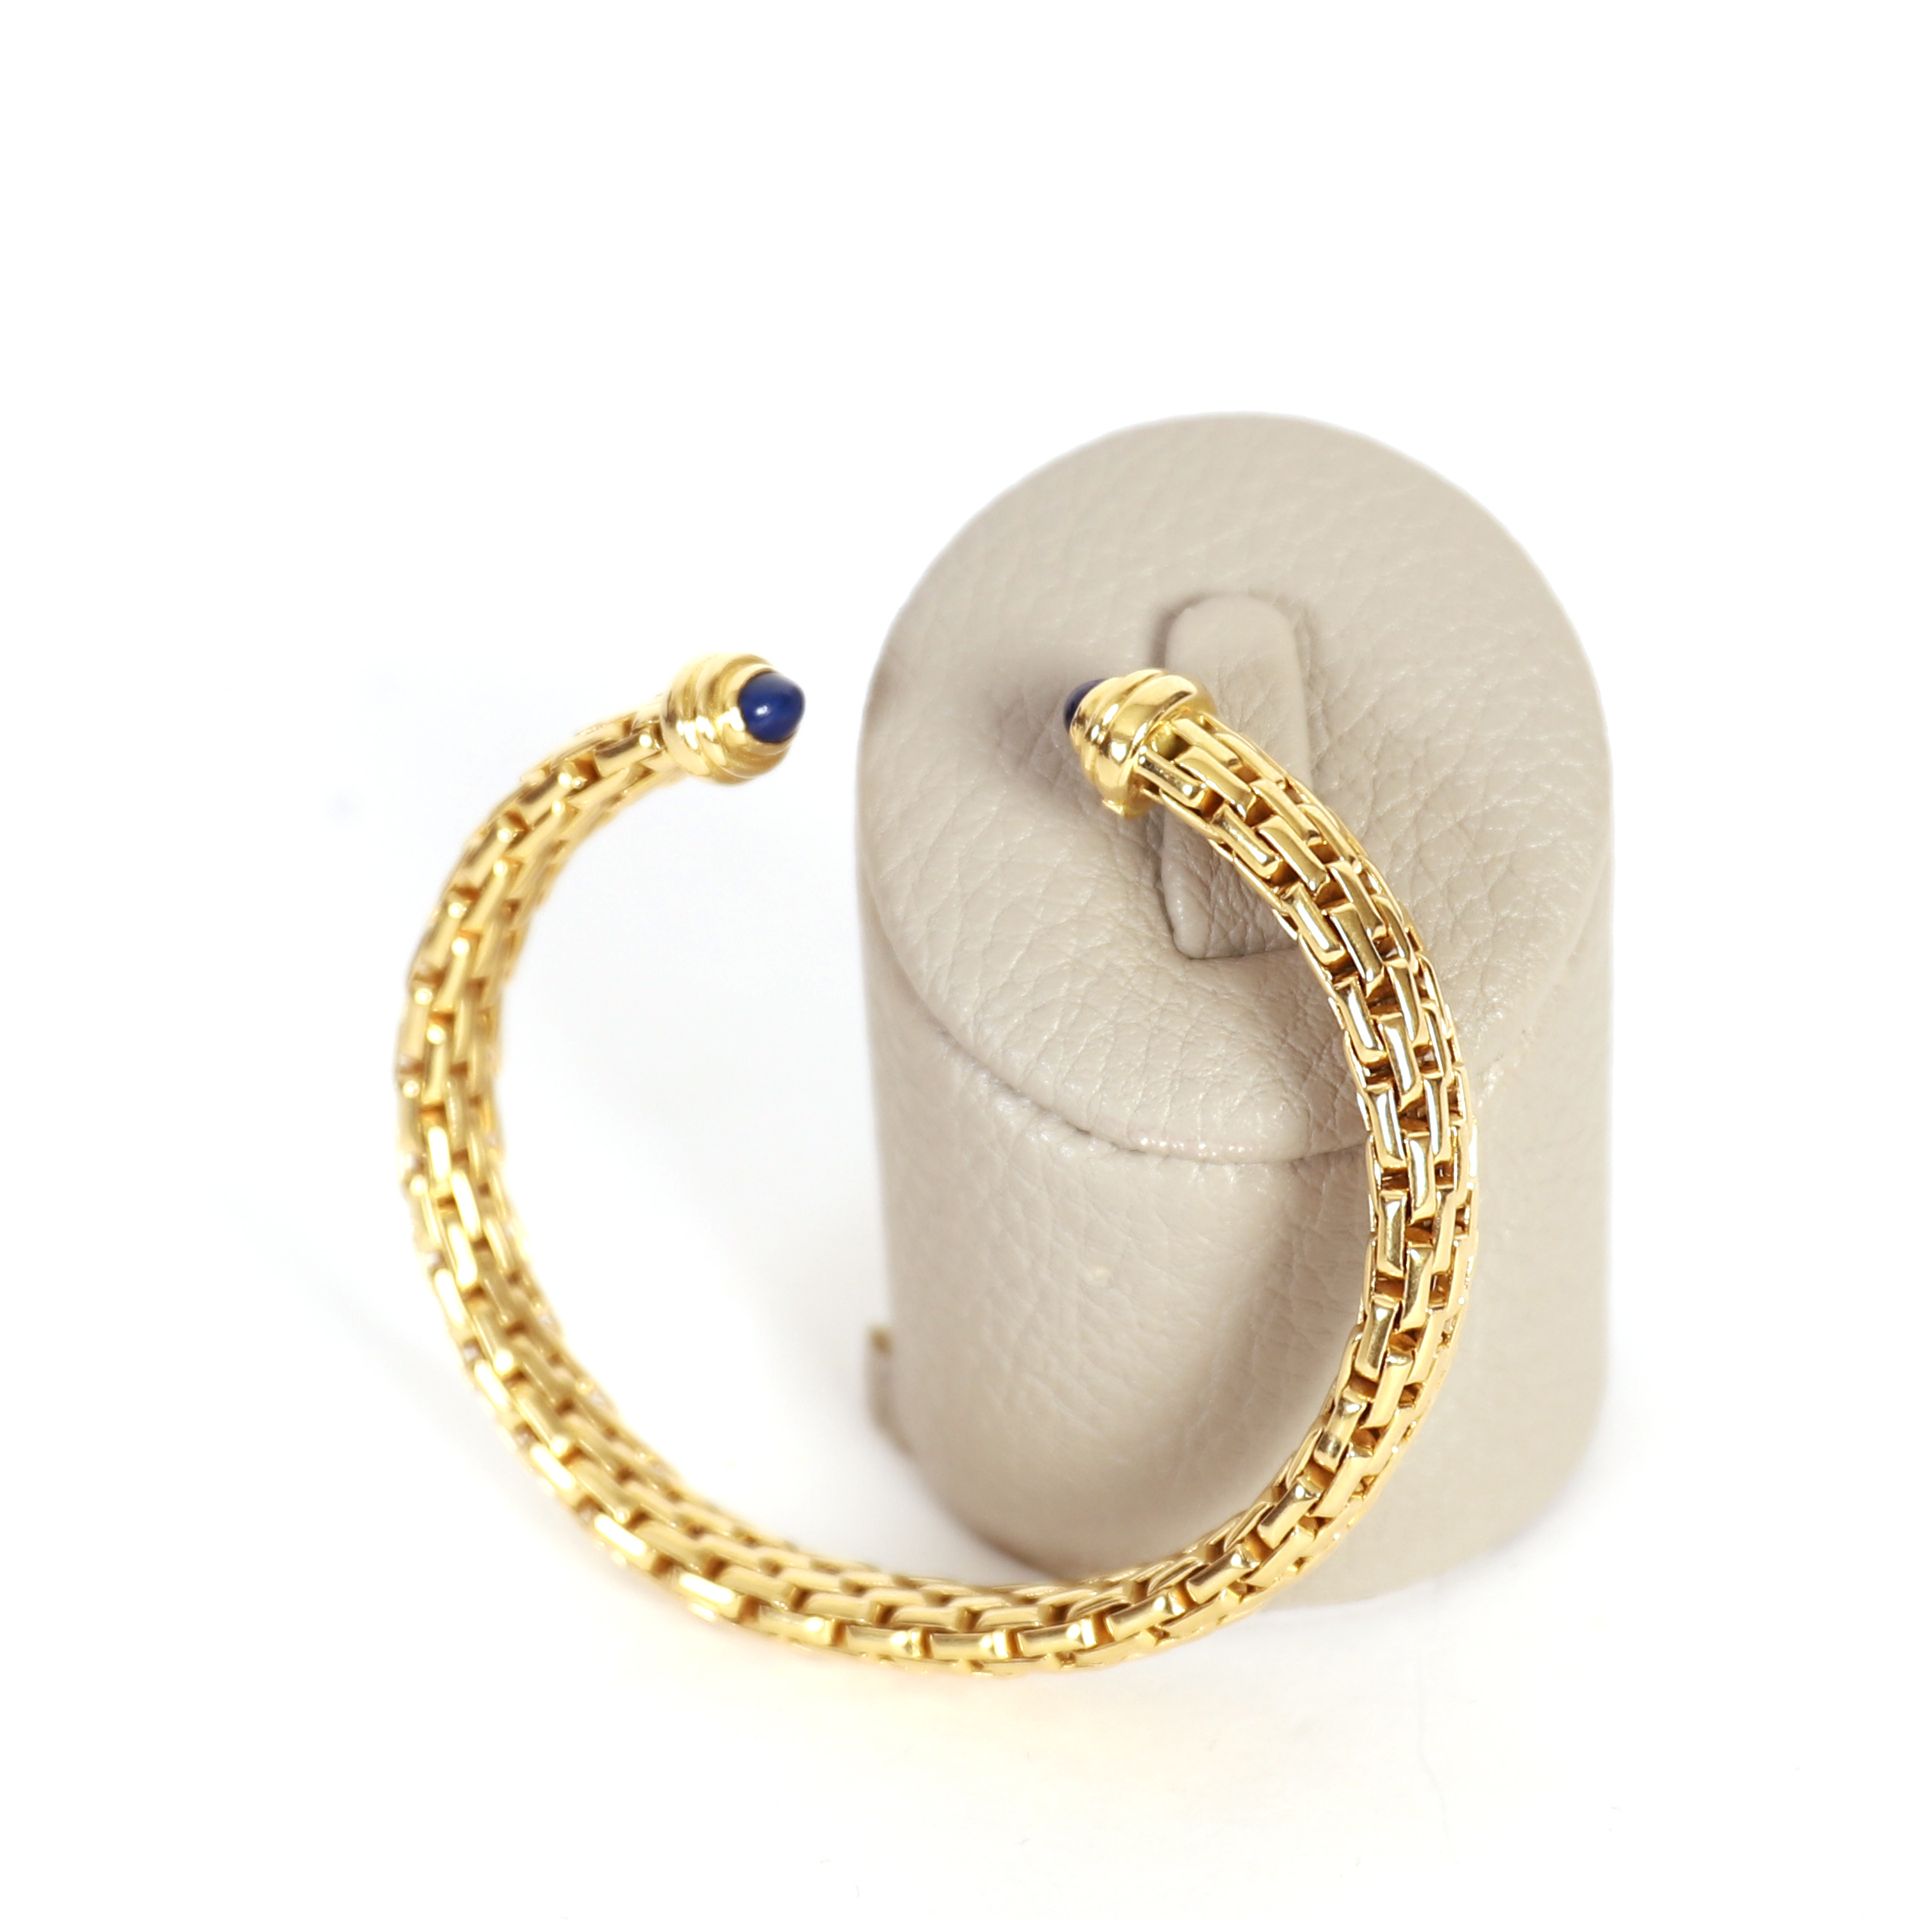 Null 
SOFT BRACELET IN 18K YELLOW GOLD

Ornamented with lapis lazulis at its end&hellip;